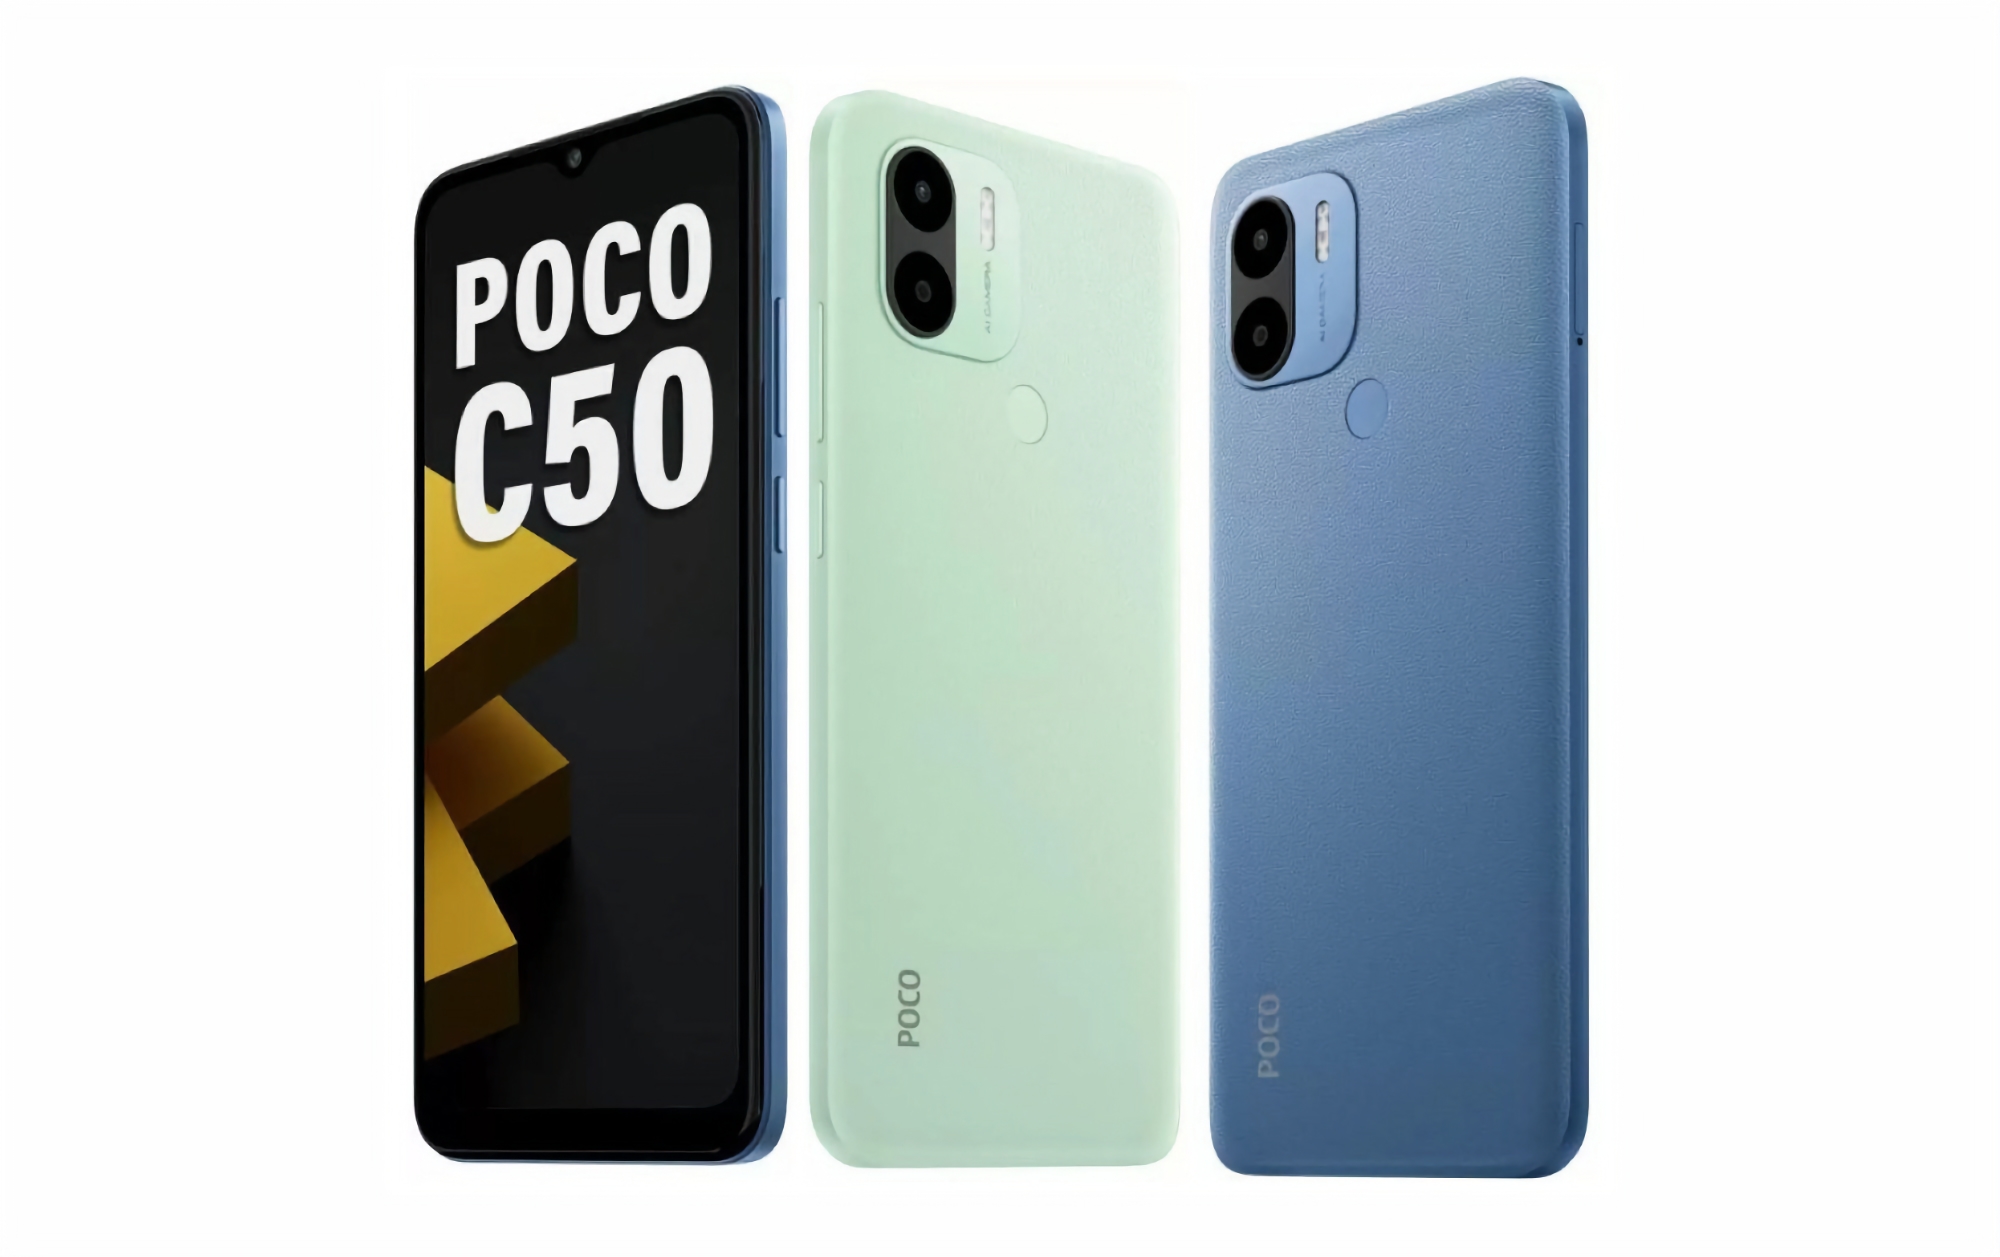 POCO C50: A copy of Redmi A1+ with MediaTek Helio A22 chip, dual camera and Android 12 Go Edition for $78